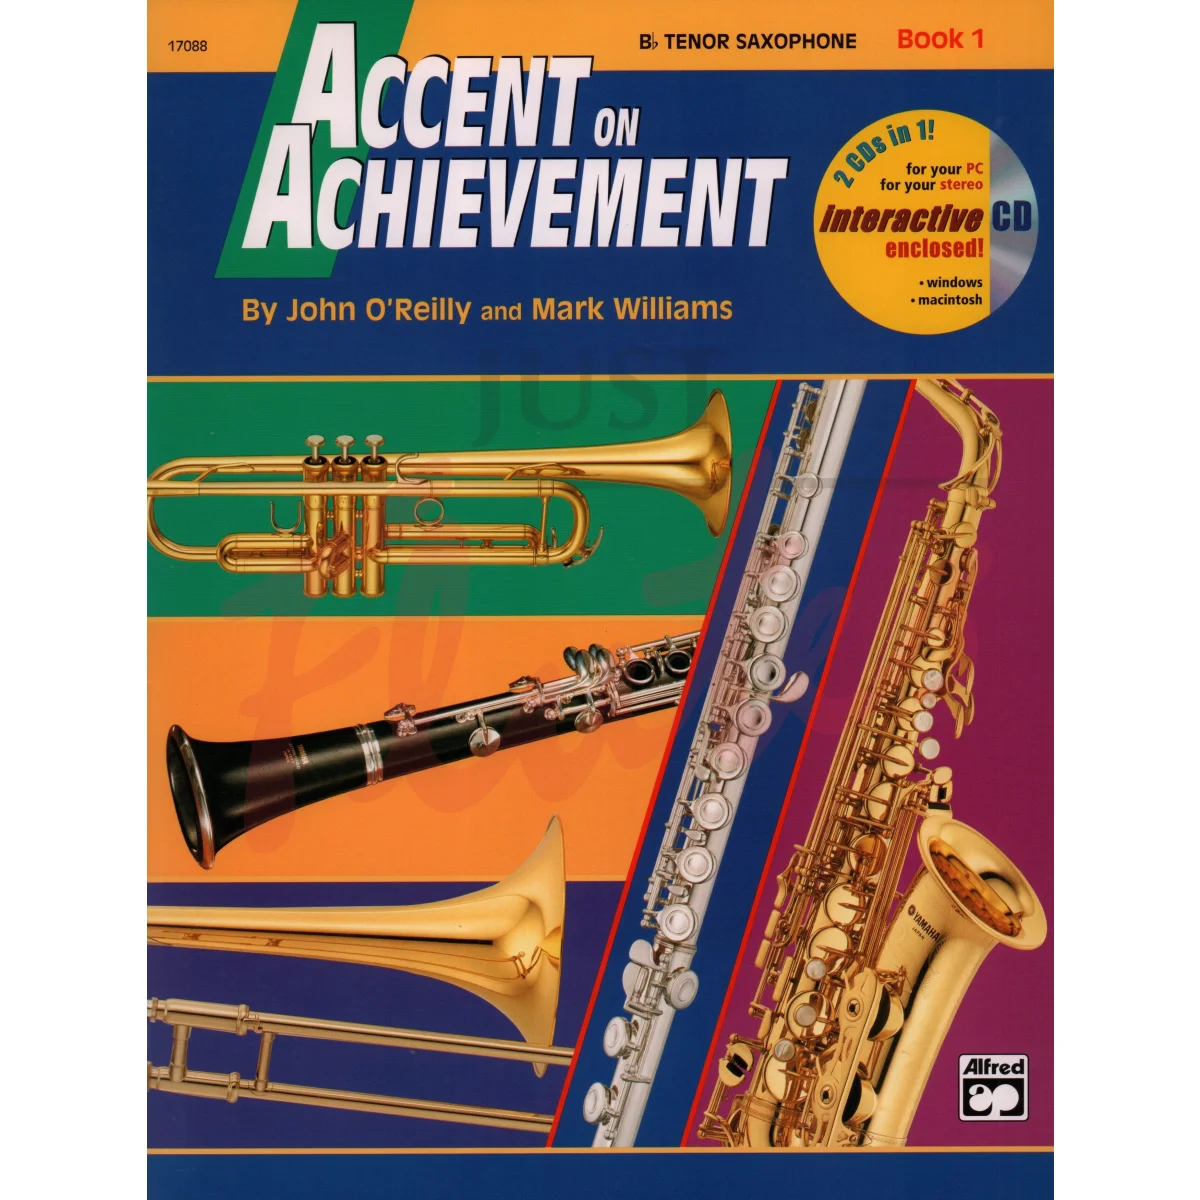 Accent on Achievement for Tenor Saxophone Book 1